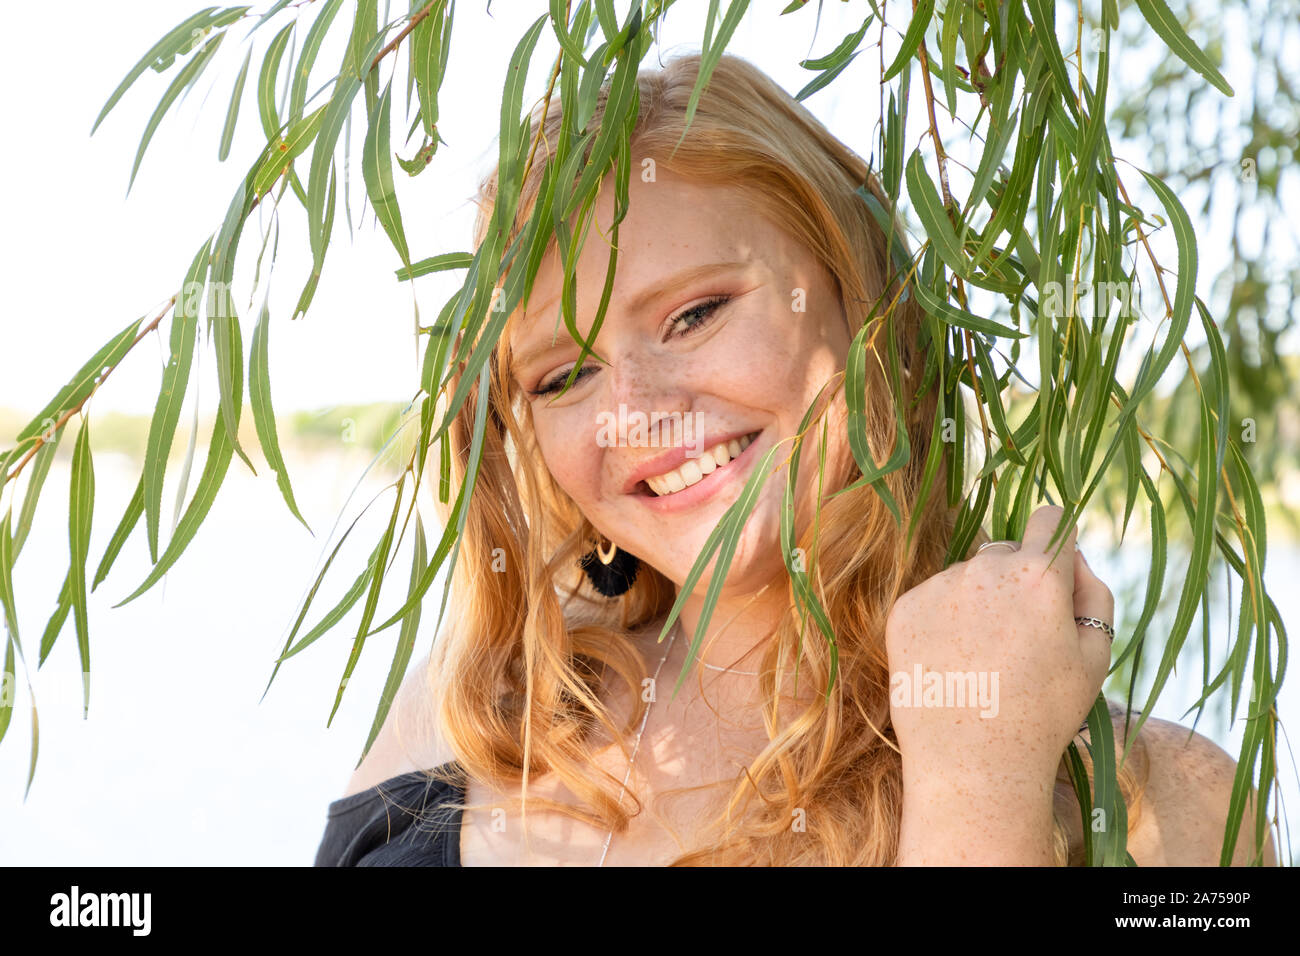 Portrait of a gorgeous smiling teenage girl with red hair outdoors Stock Photo